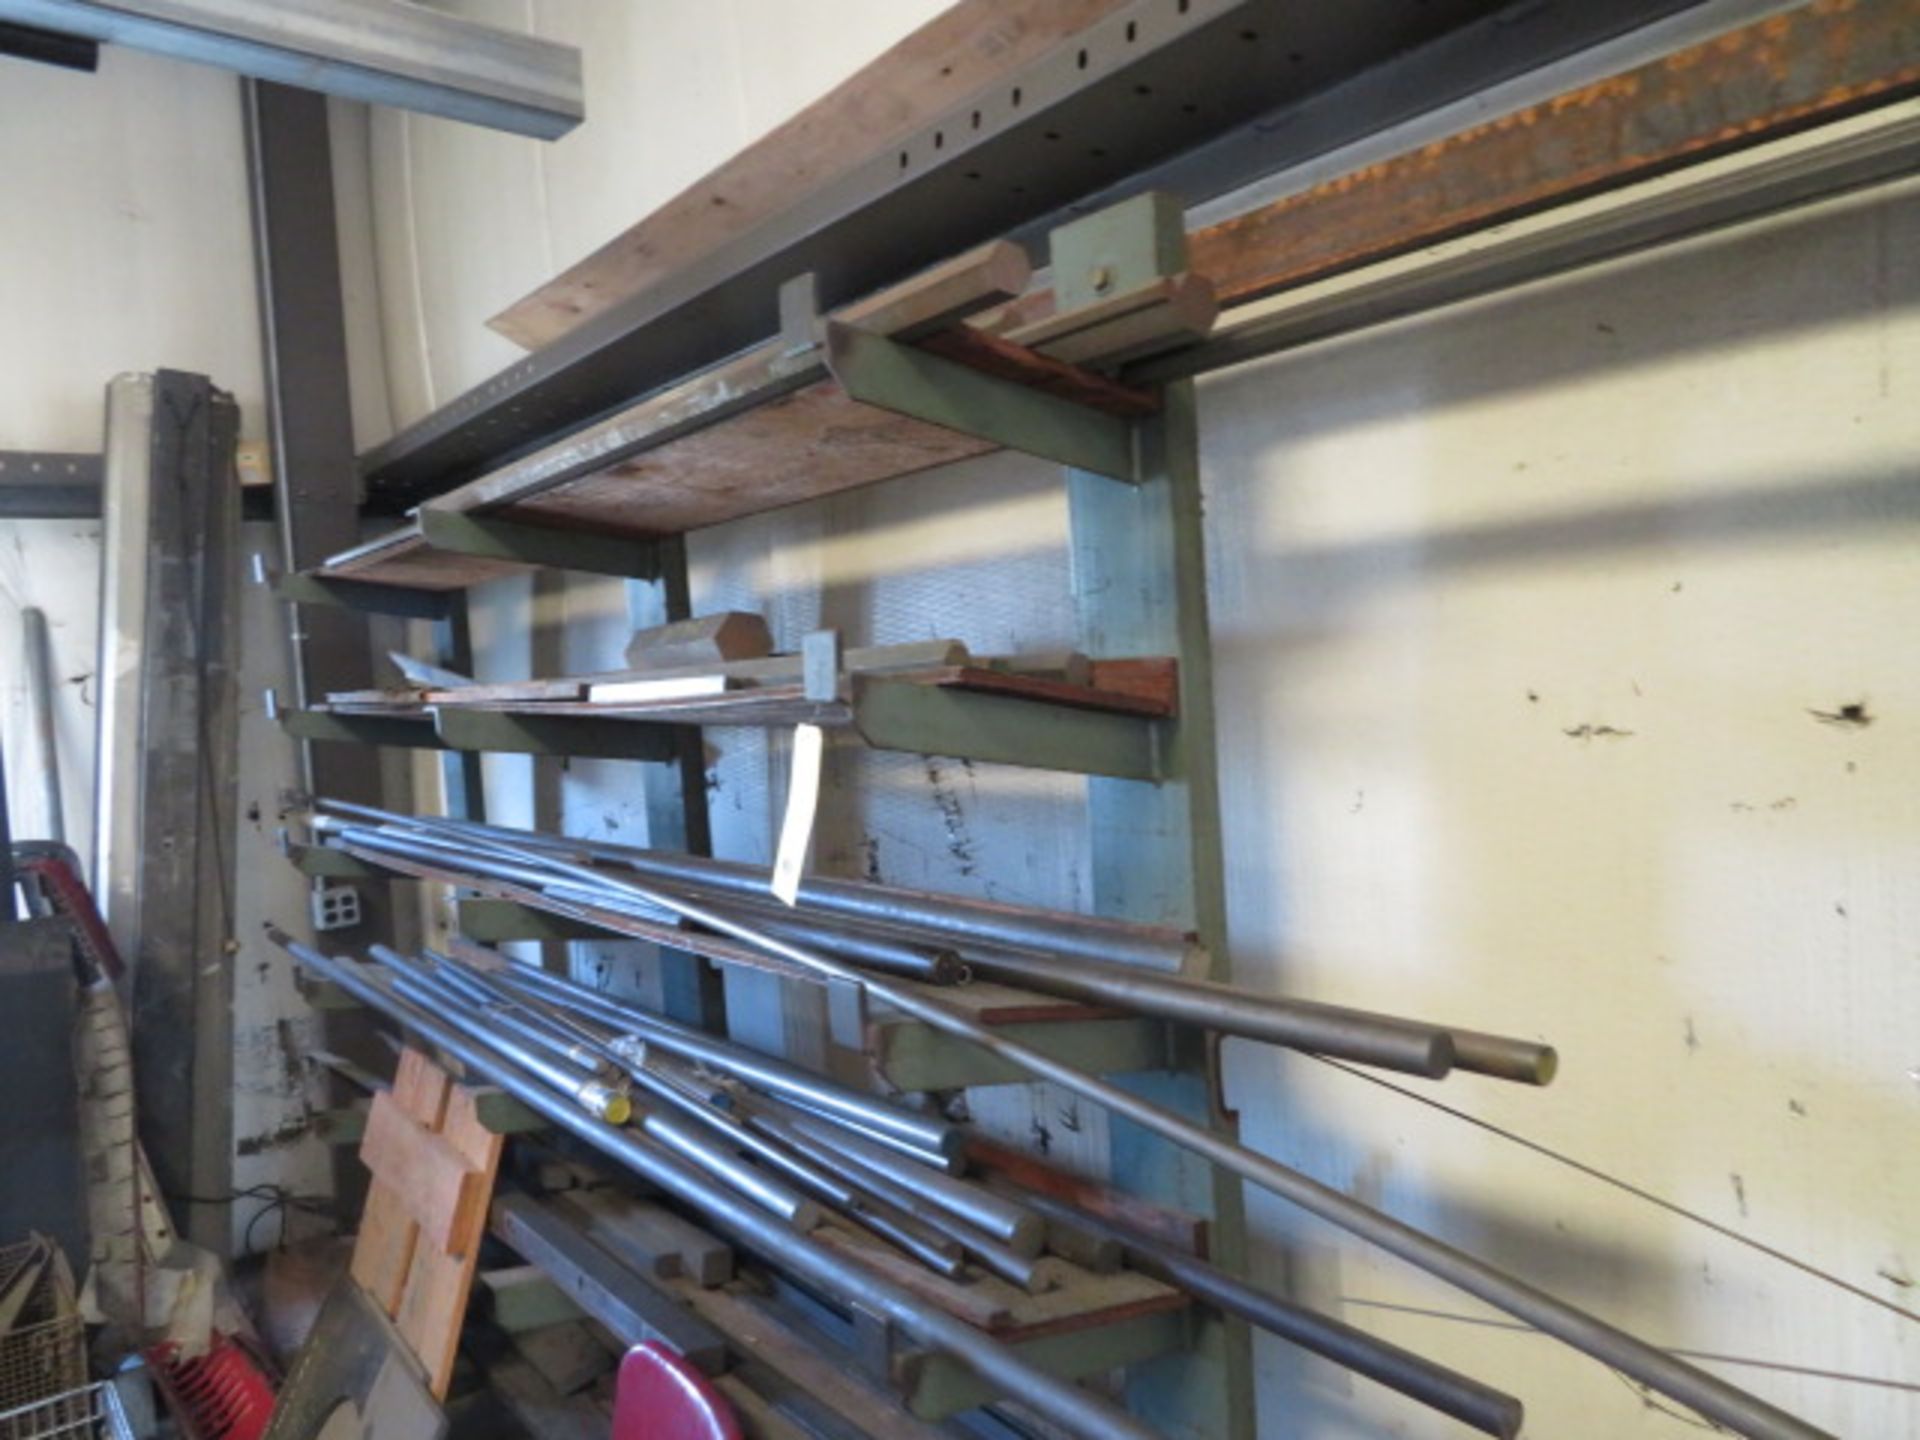 ALL STEEL, STAINLESS STEEL, BRASS, BRONZE, ALUMINUM AND THREADED ROD IN THE ROOM (NO AUTO PARTS - Image 7 of 39